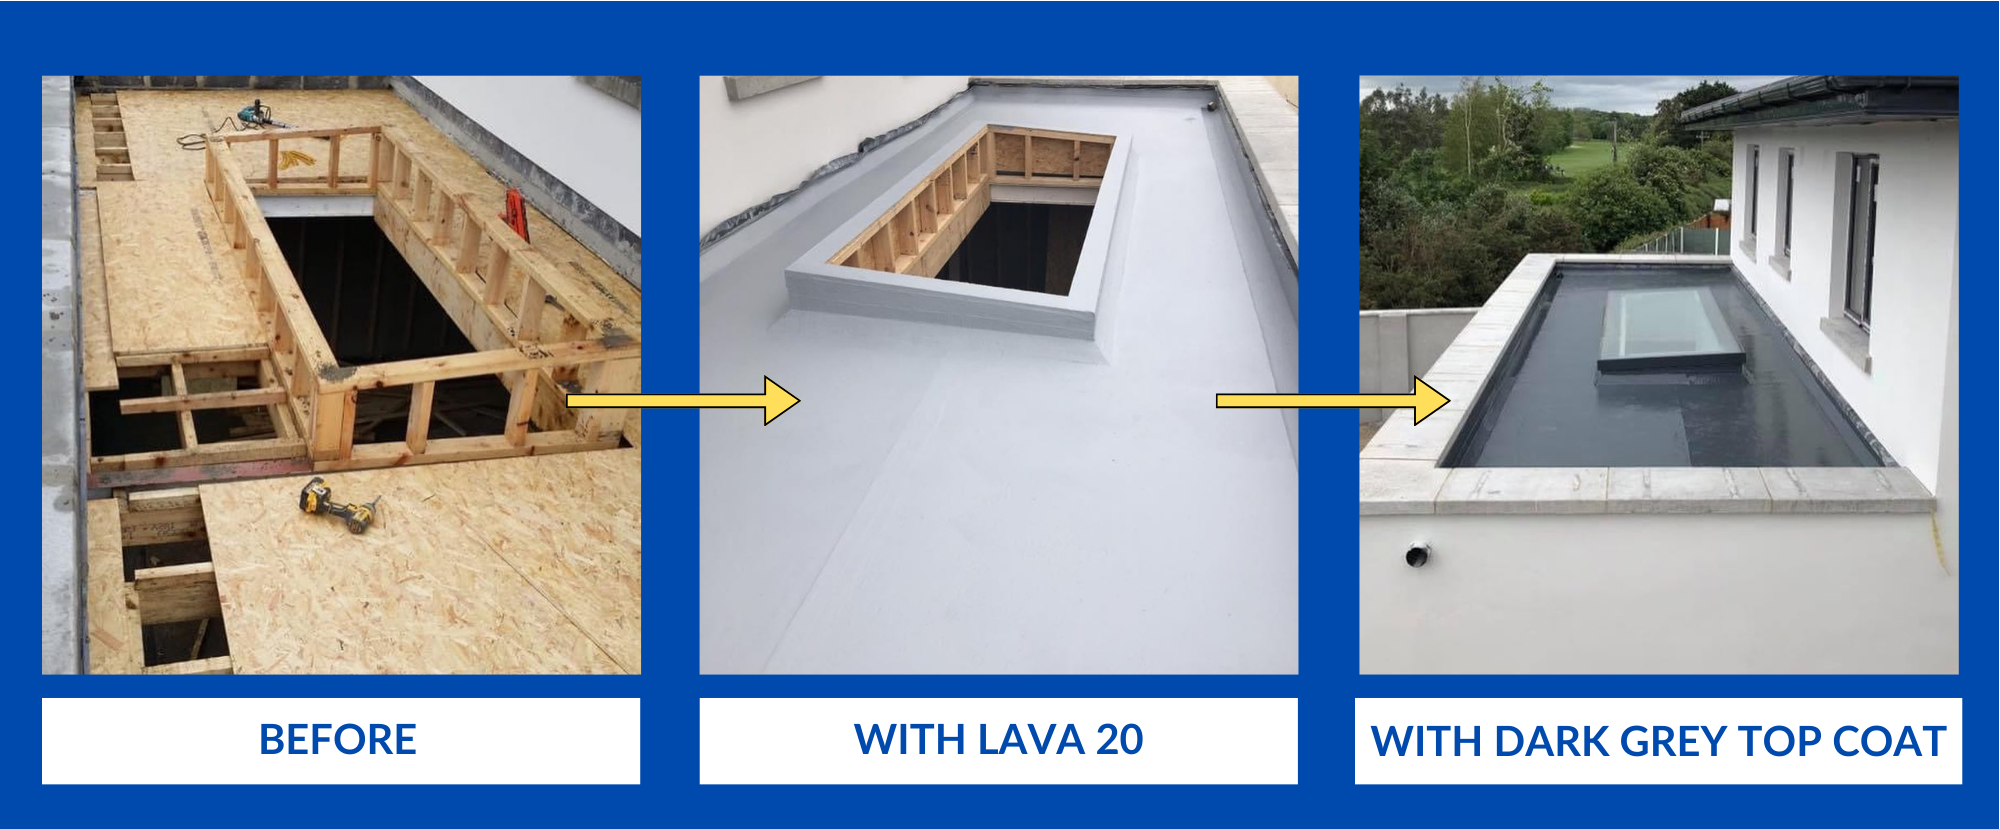 Flat roof restored twith Lava 20 before and after